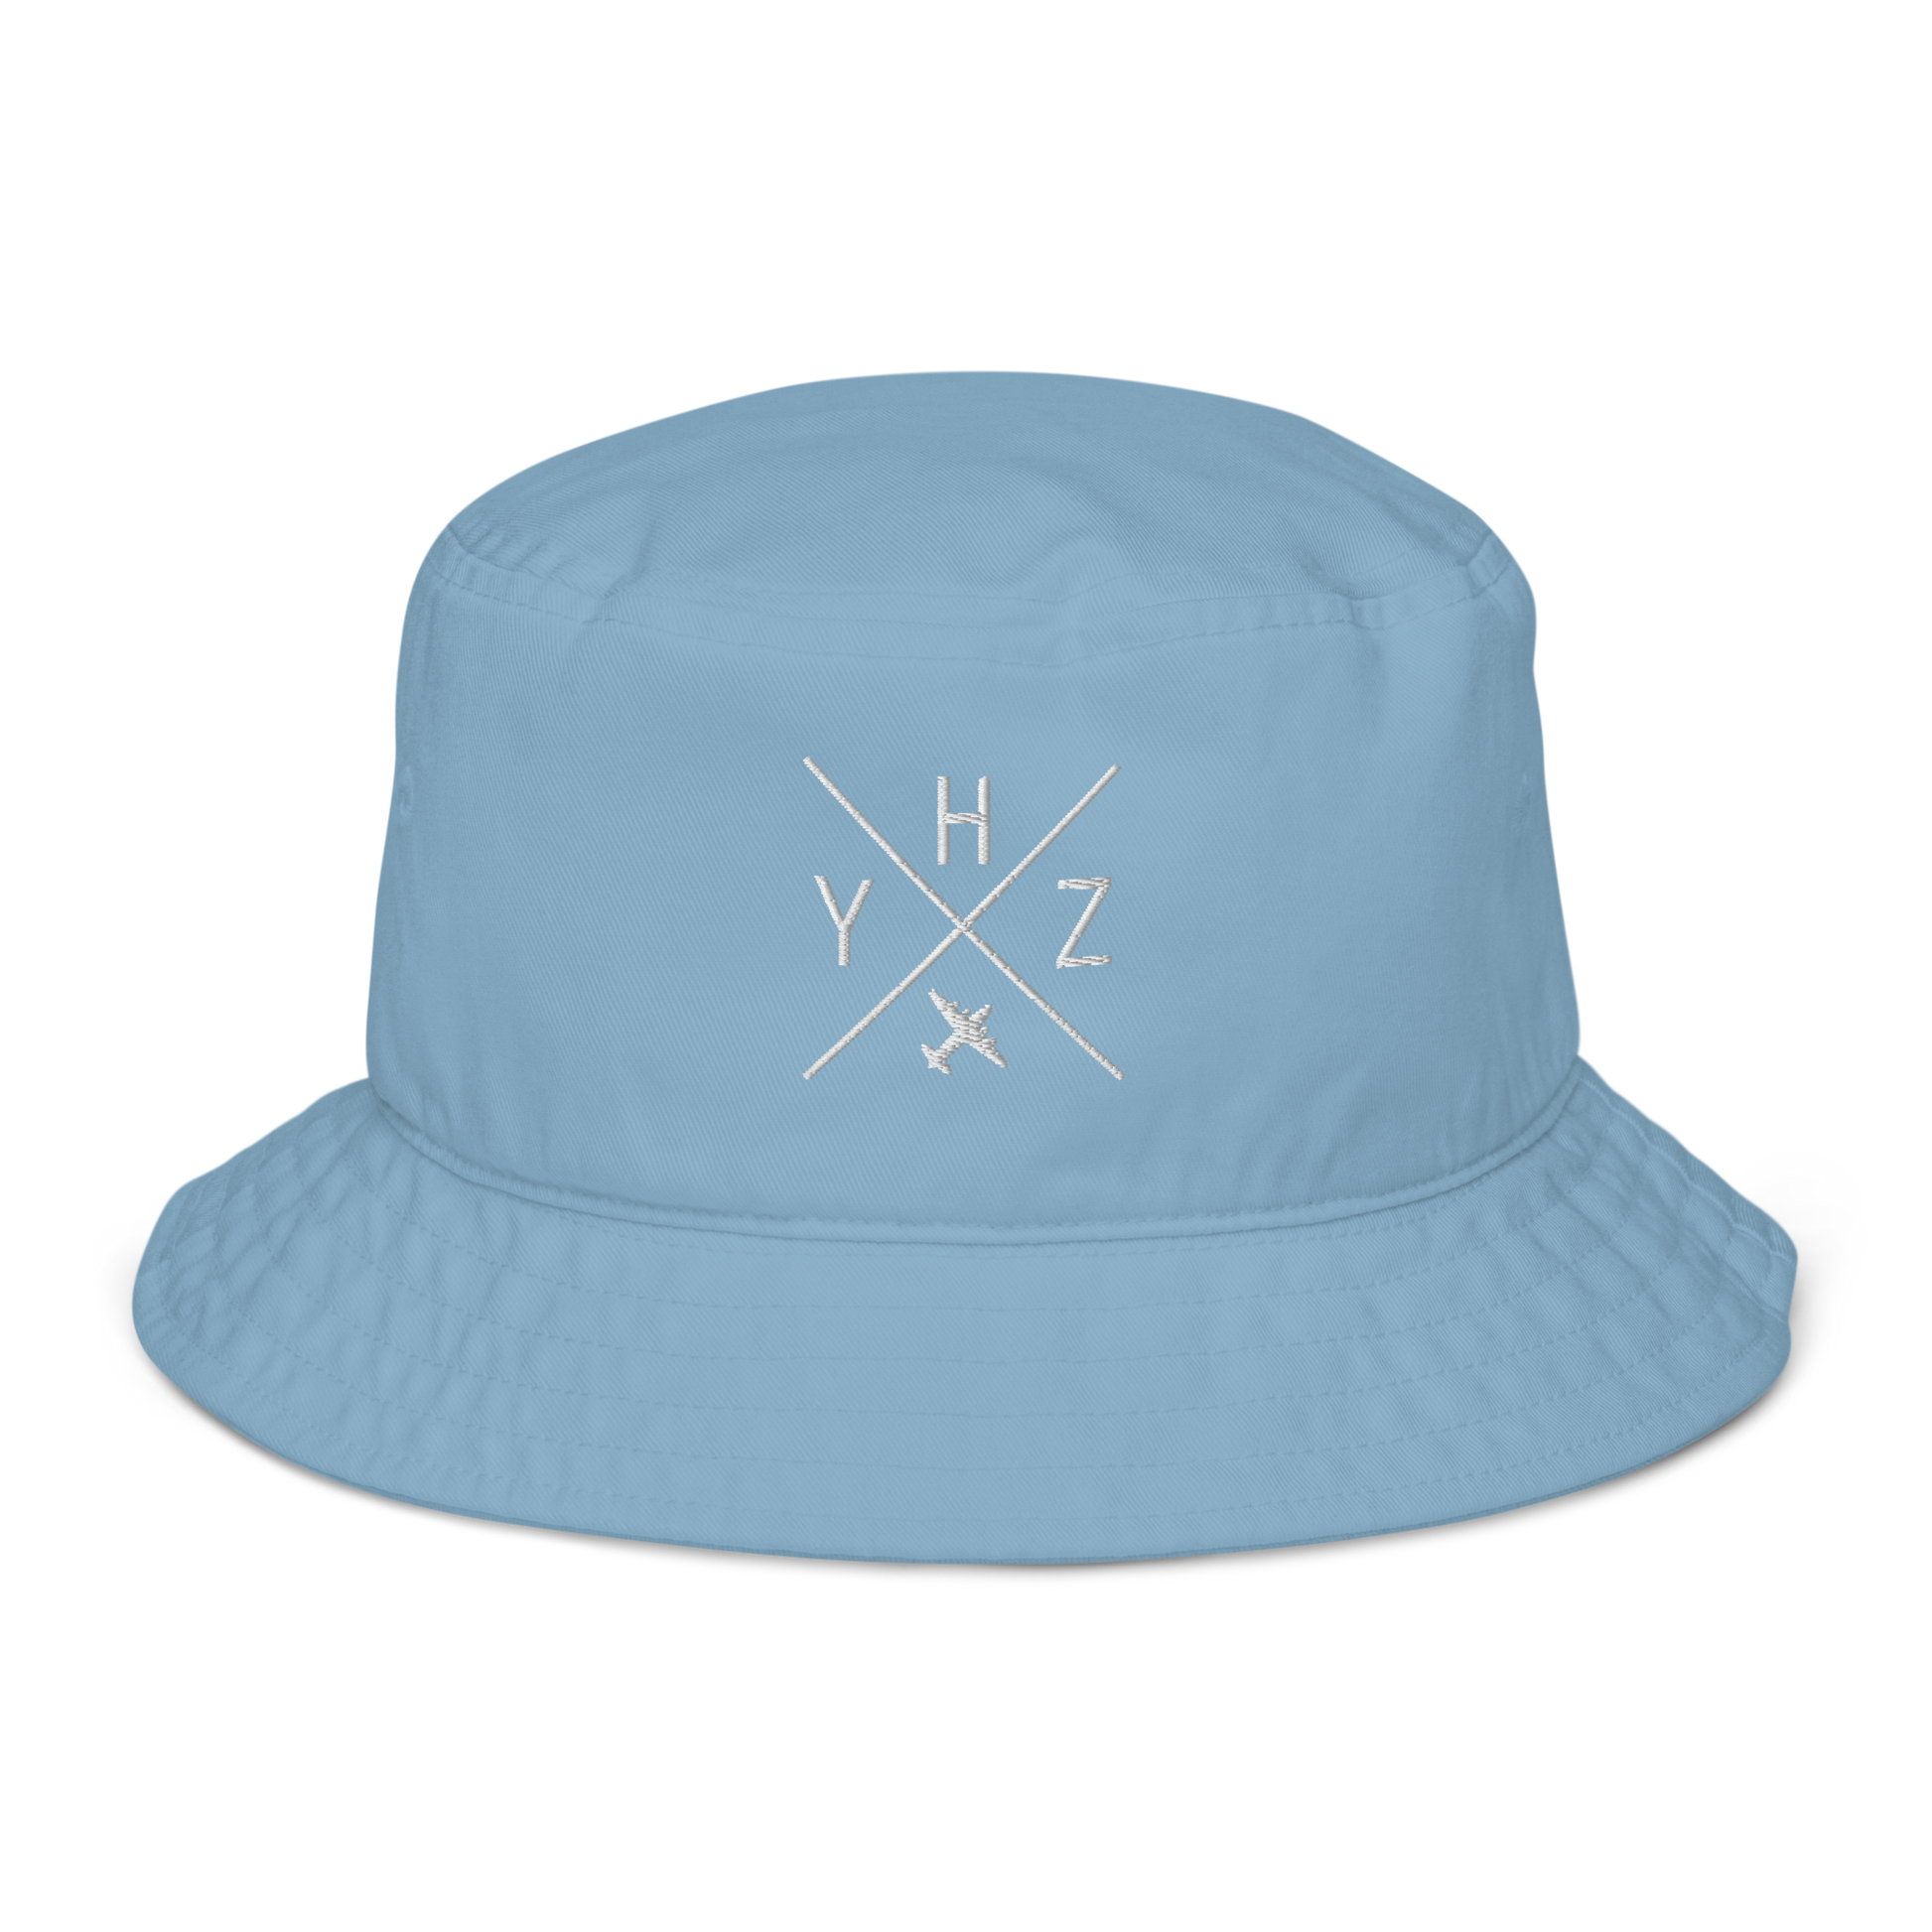 YHM Designs - YHZ Halifax Organic Cotton Bucket Hat - Crossed-X Design with Airport Code and Vintage Propliner - White Embroidery - Image 07